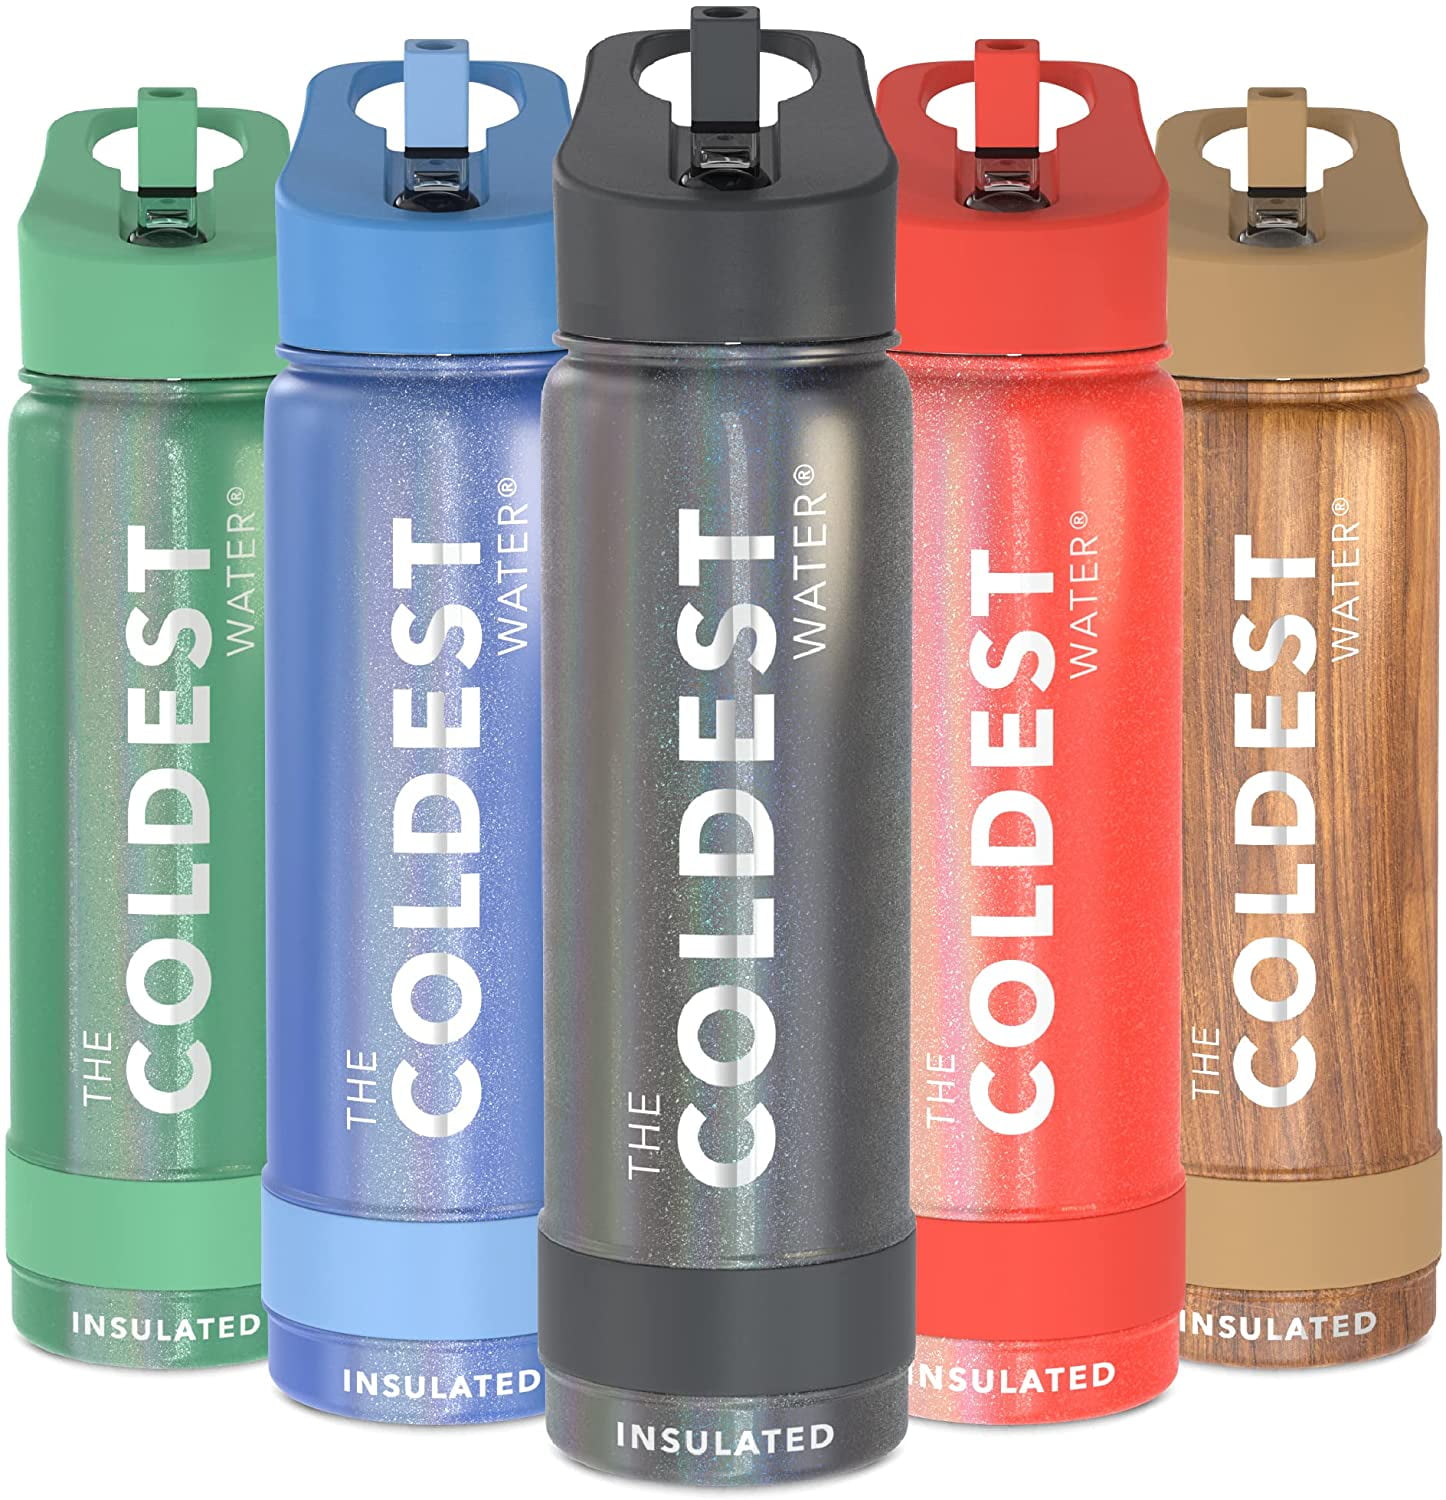 The Coldest Sports Water Bottle Vacuum Insulated Stainless